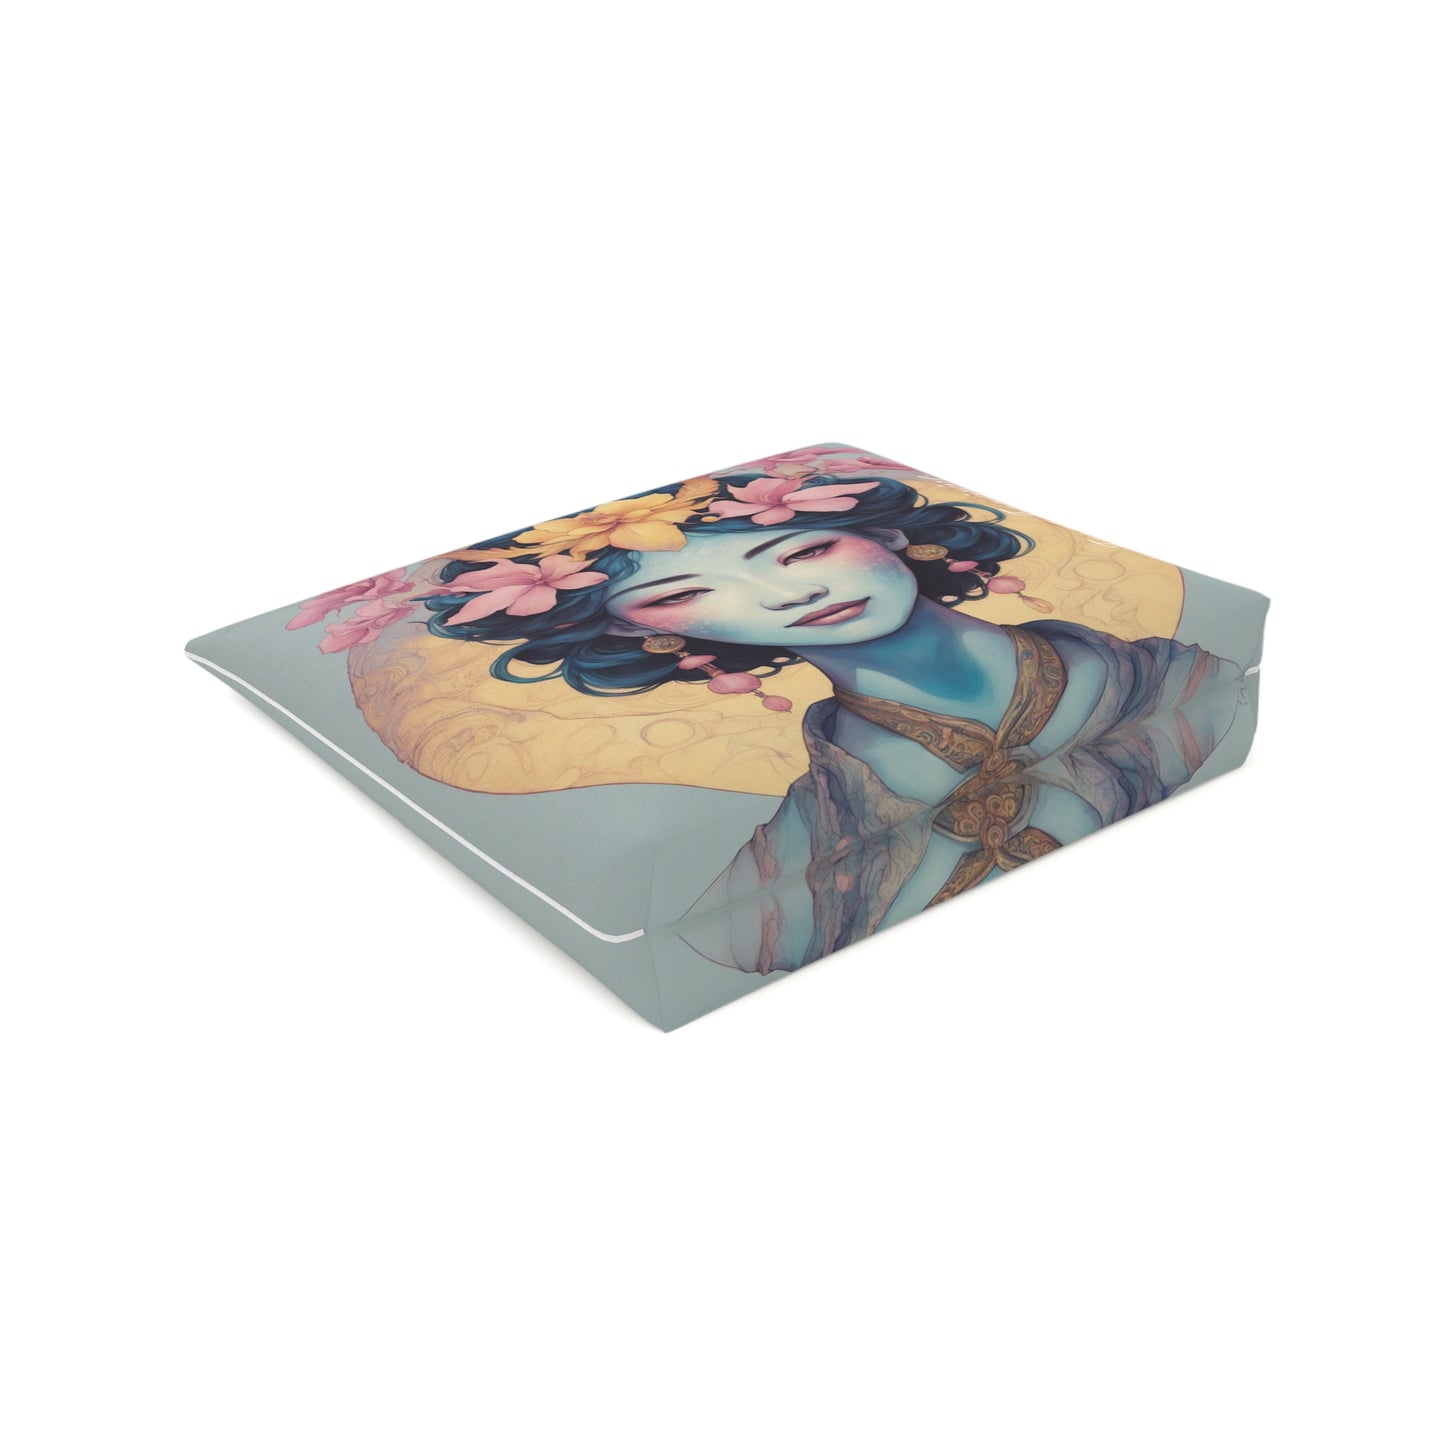 Wild Orchid Goddess - Cotton Cosmetic Bag